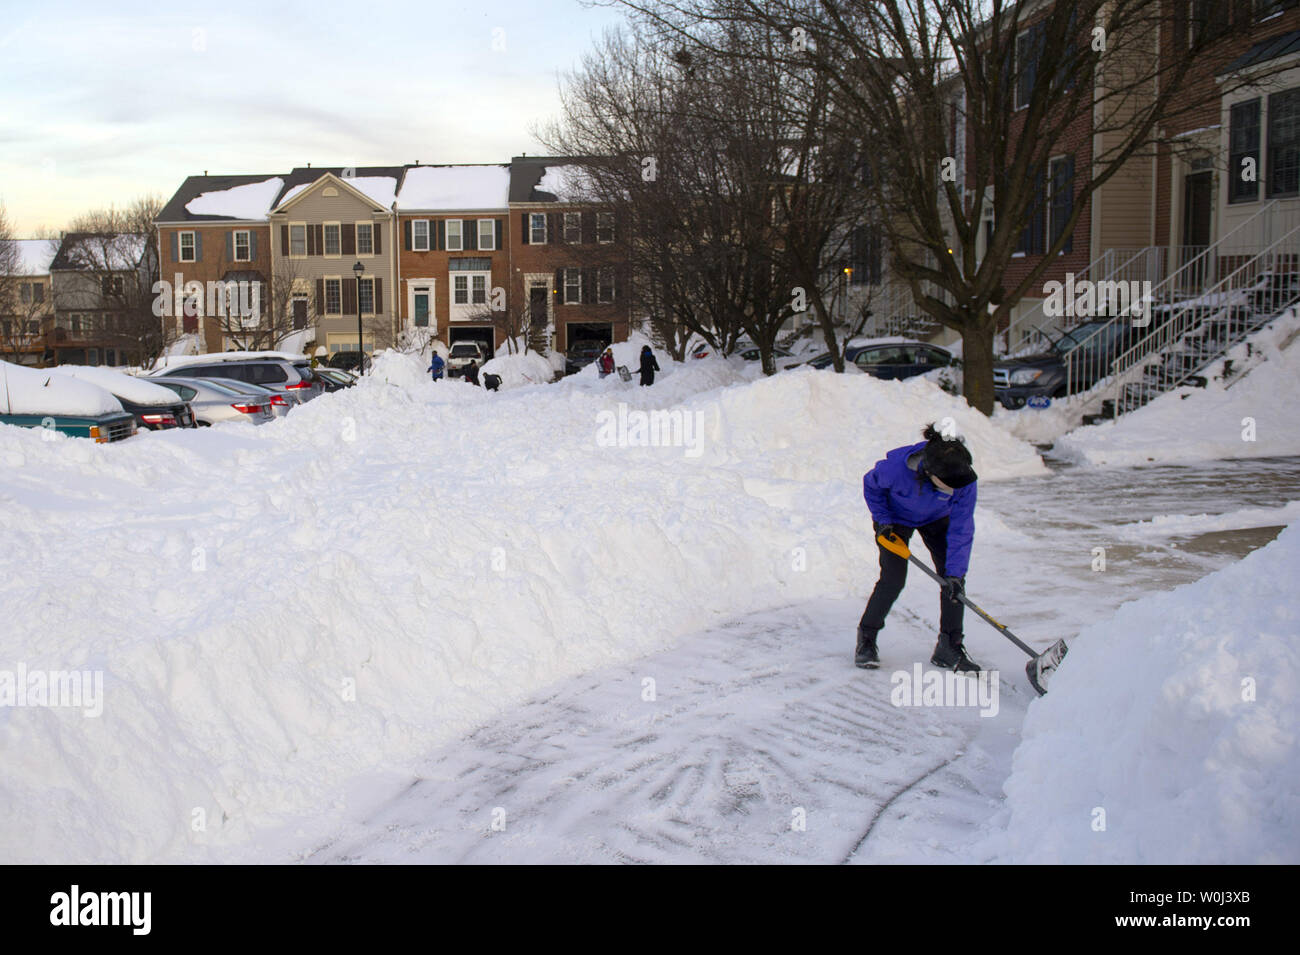 A woman shovels snow following this weekend's blizzard, in Centreville, Virginia on January 25, 2016. A deadly nor'easter blizzard blanketed parts of the east coast bringing near-record amounts of snow, shutting down Washington, Philadelphia and New York city. Photo by Kevin Dietsch/UPI Stock Photo